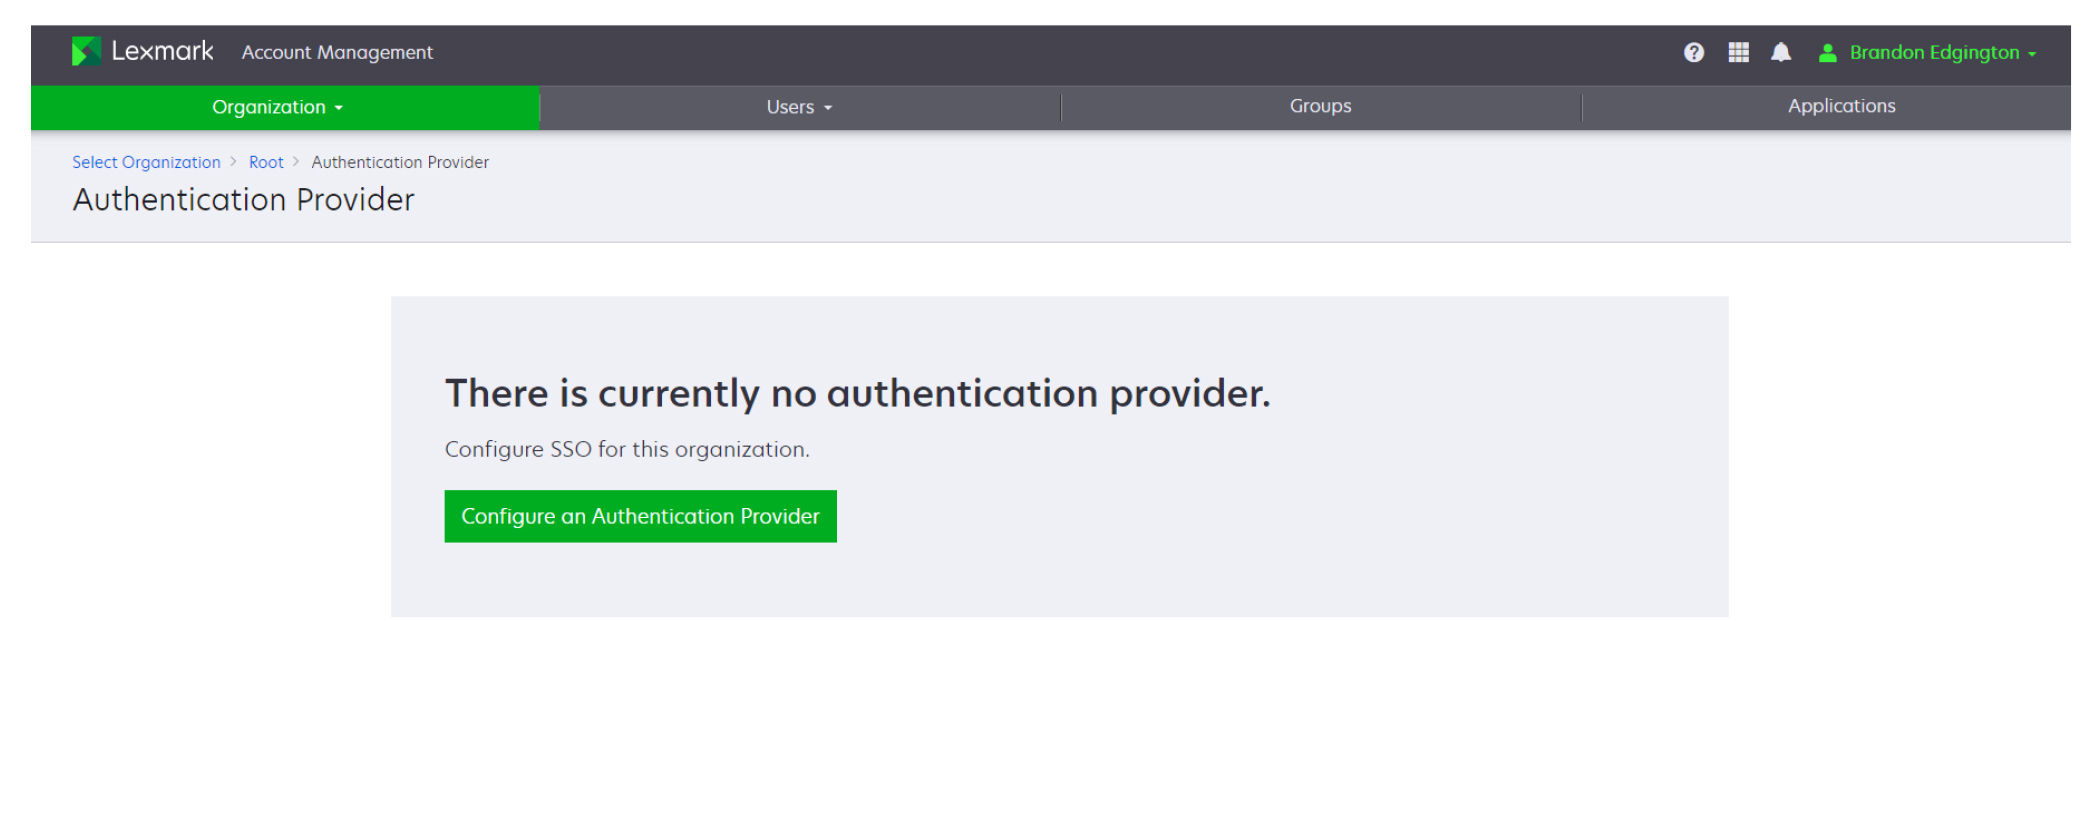 A screenshot showing the Configure on Authentication Provider button.